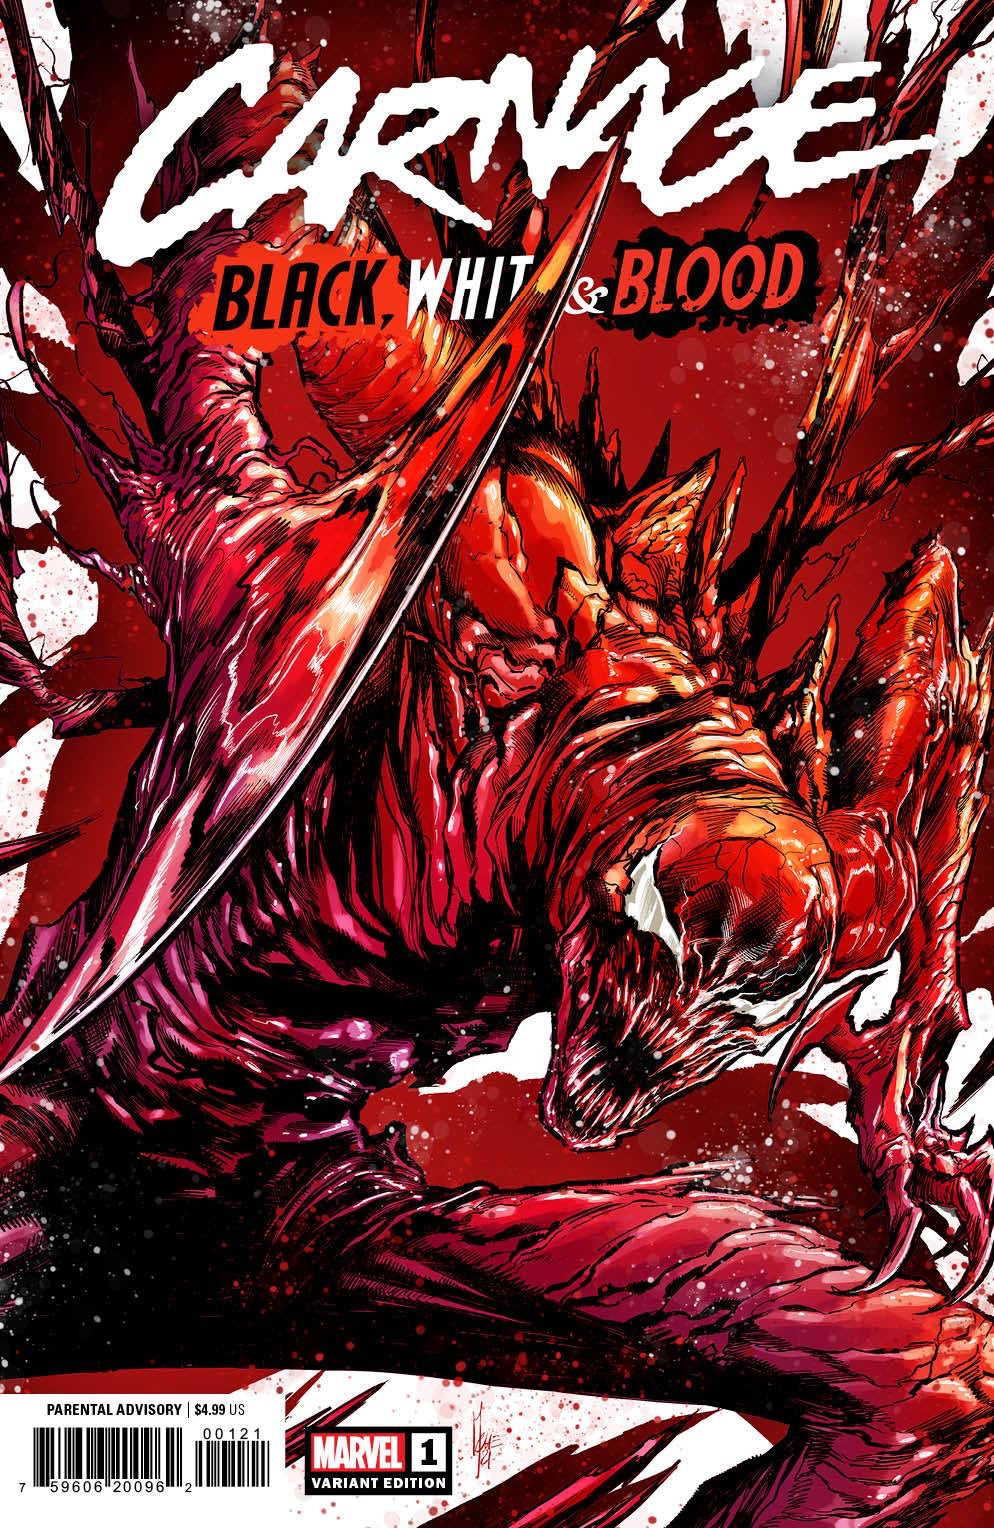 CARNAGE BLACK WHITE AND BLOOD #1 (OF 4) 1:50 CHECCHETTO VARIANT 03/24/21